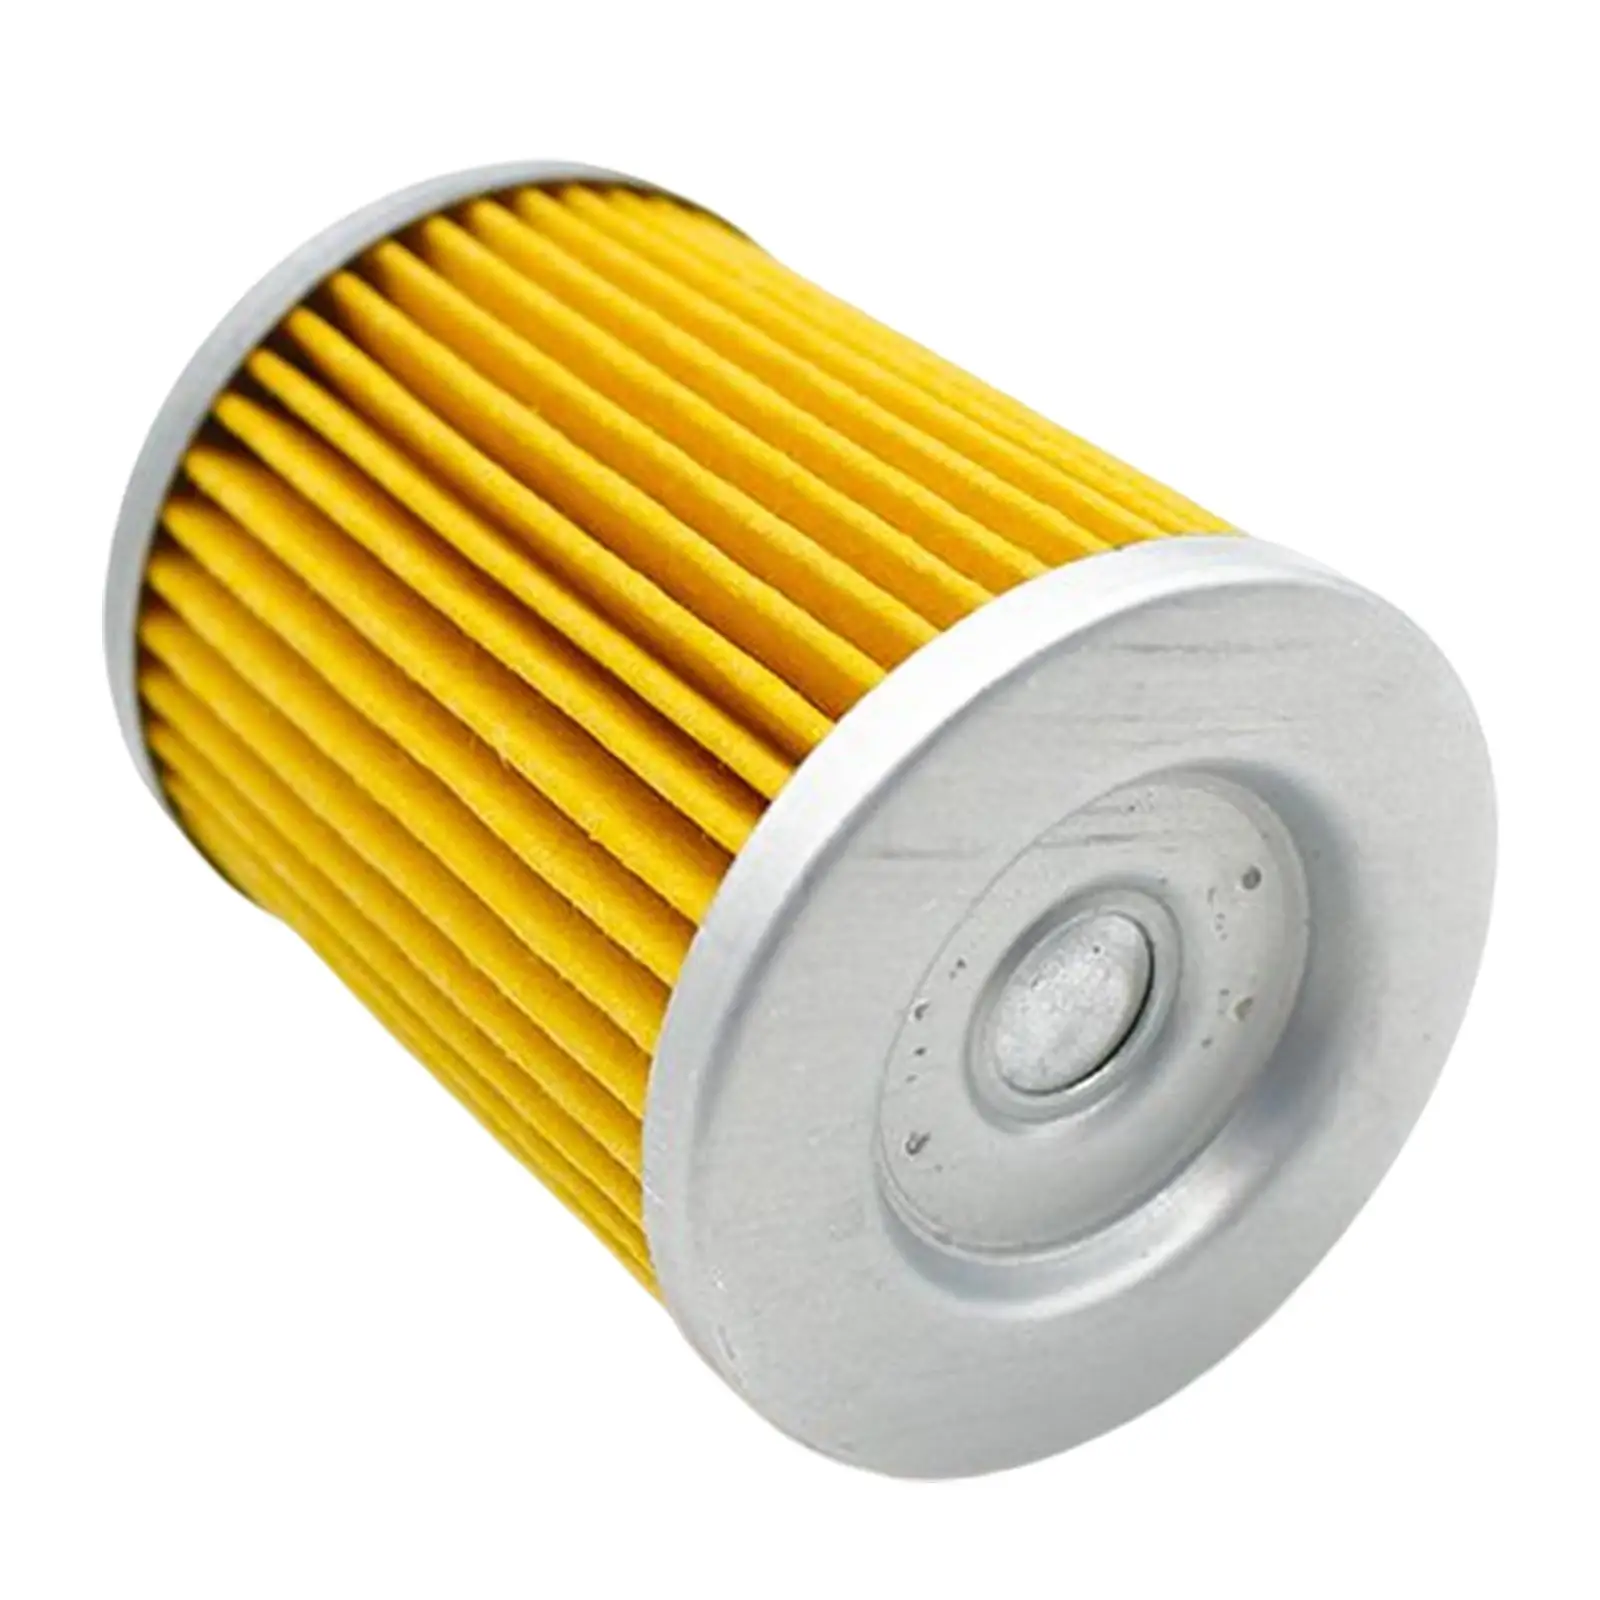 Motorcycle Oil Filter Replacement for 250 300 YP400 RV125 250 Premium High Performance